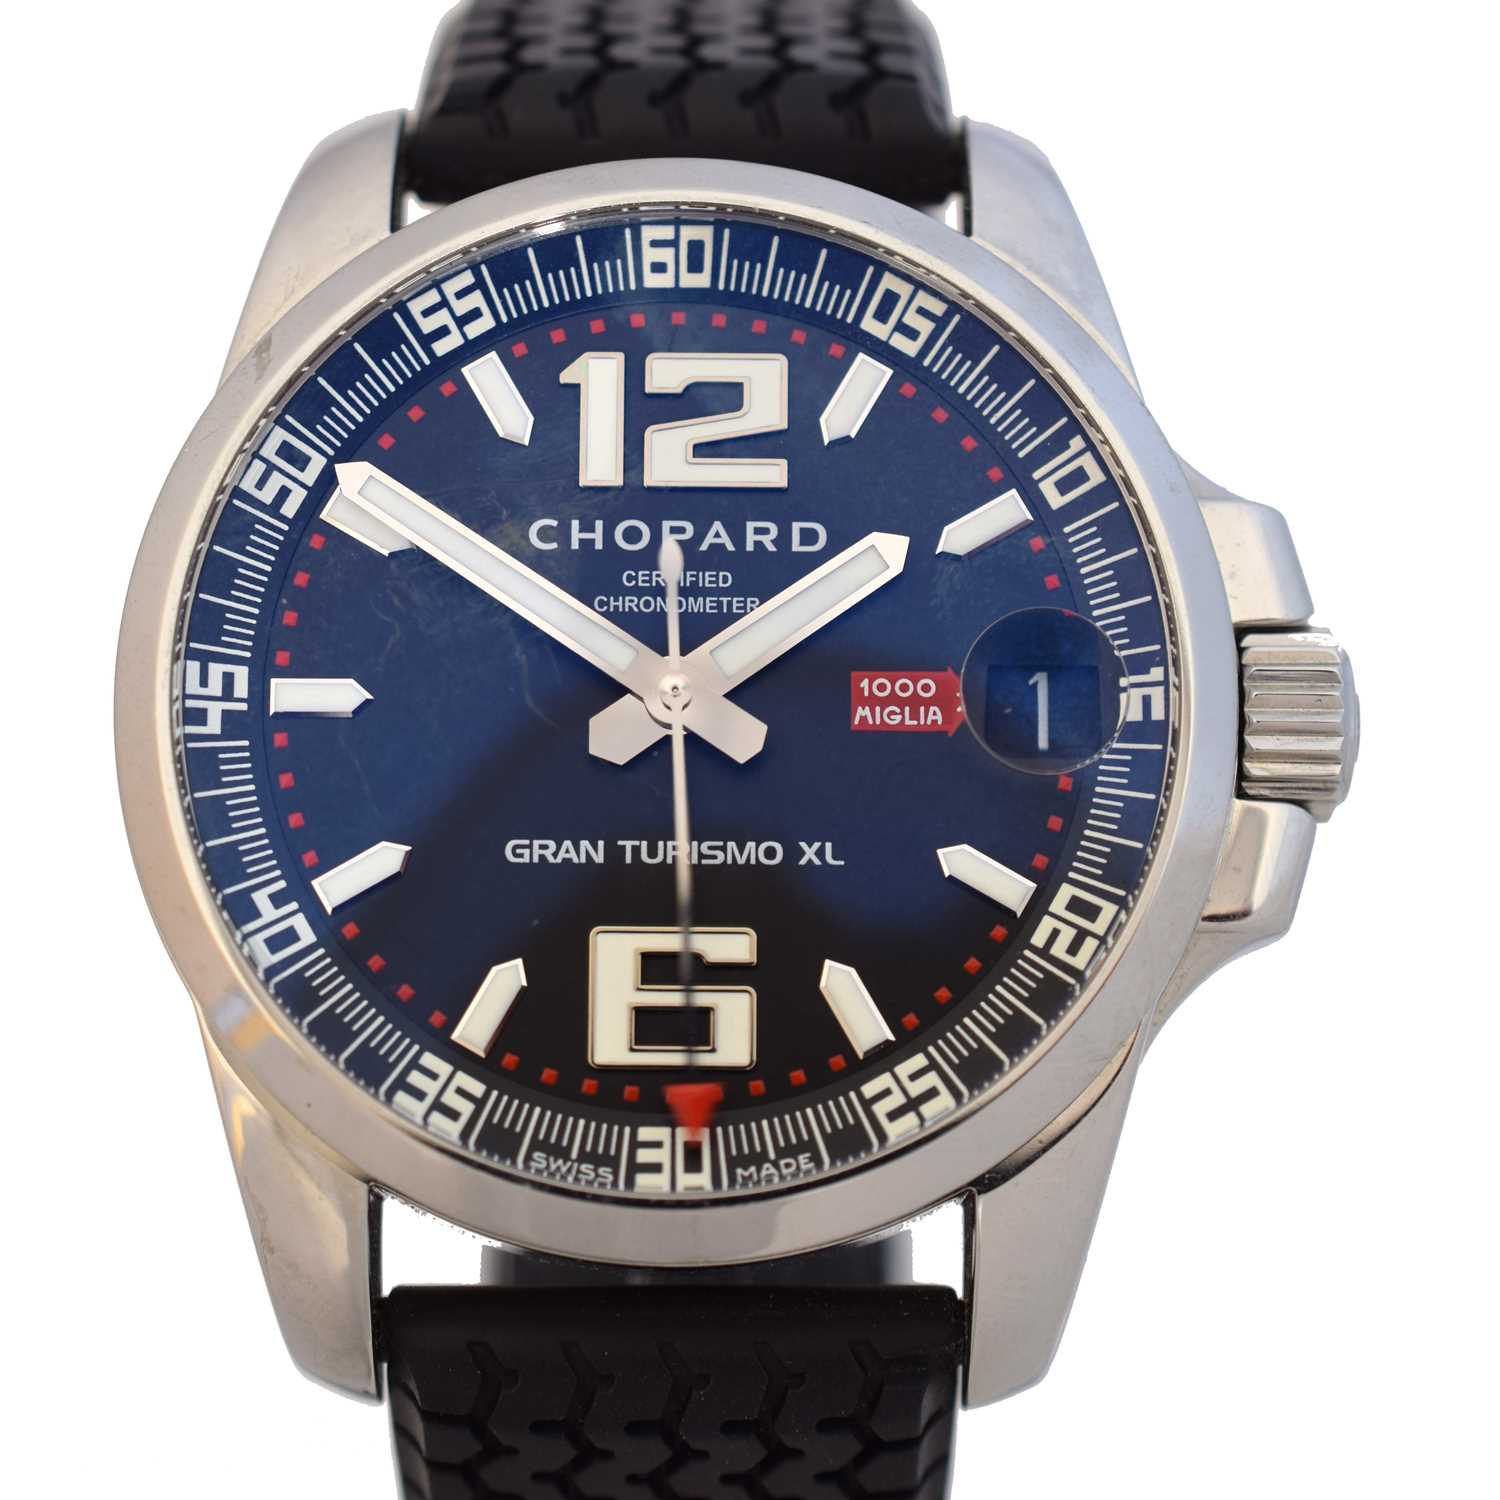 Lot A stainless steel Chopard Mille Miglia Gran Turismo XL watch